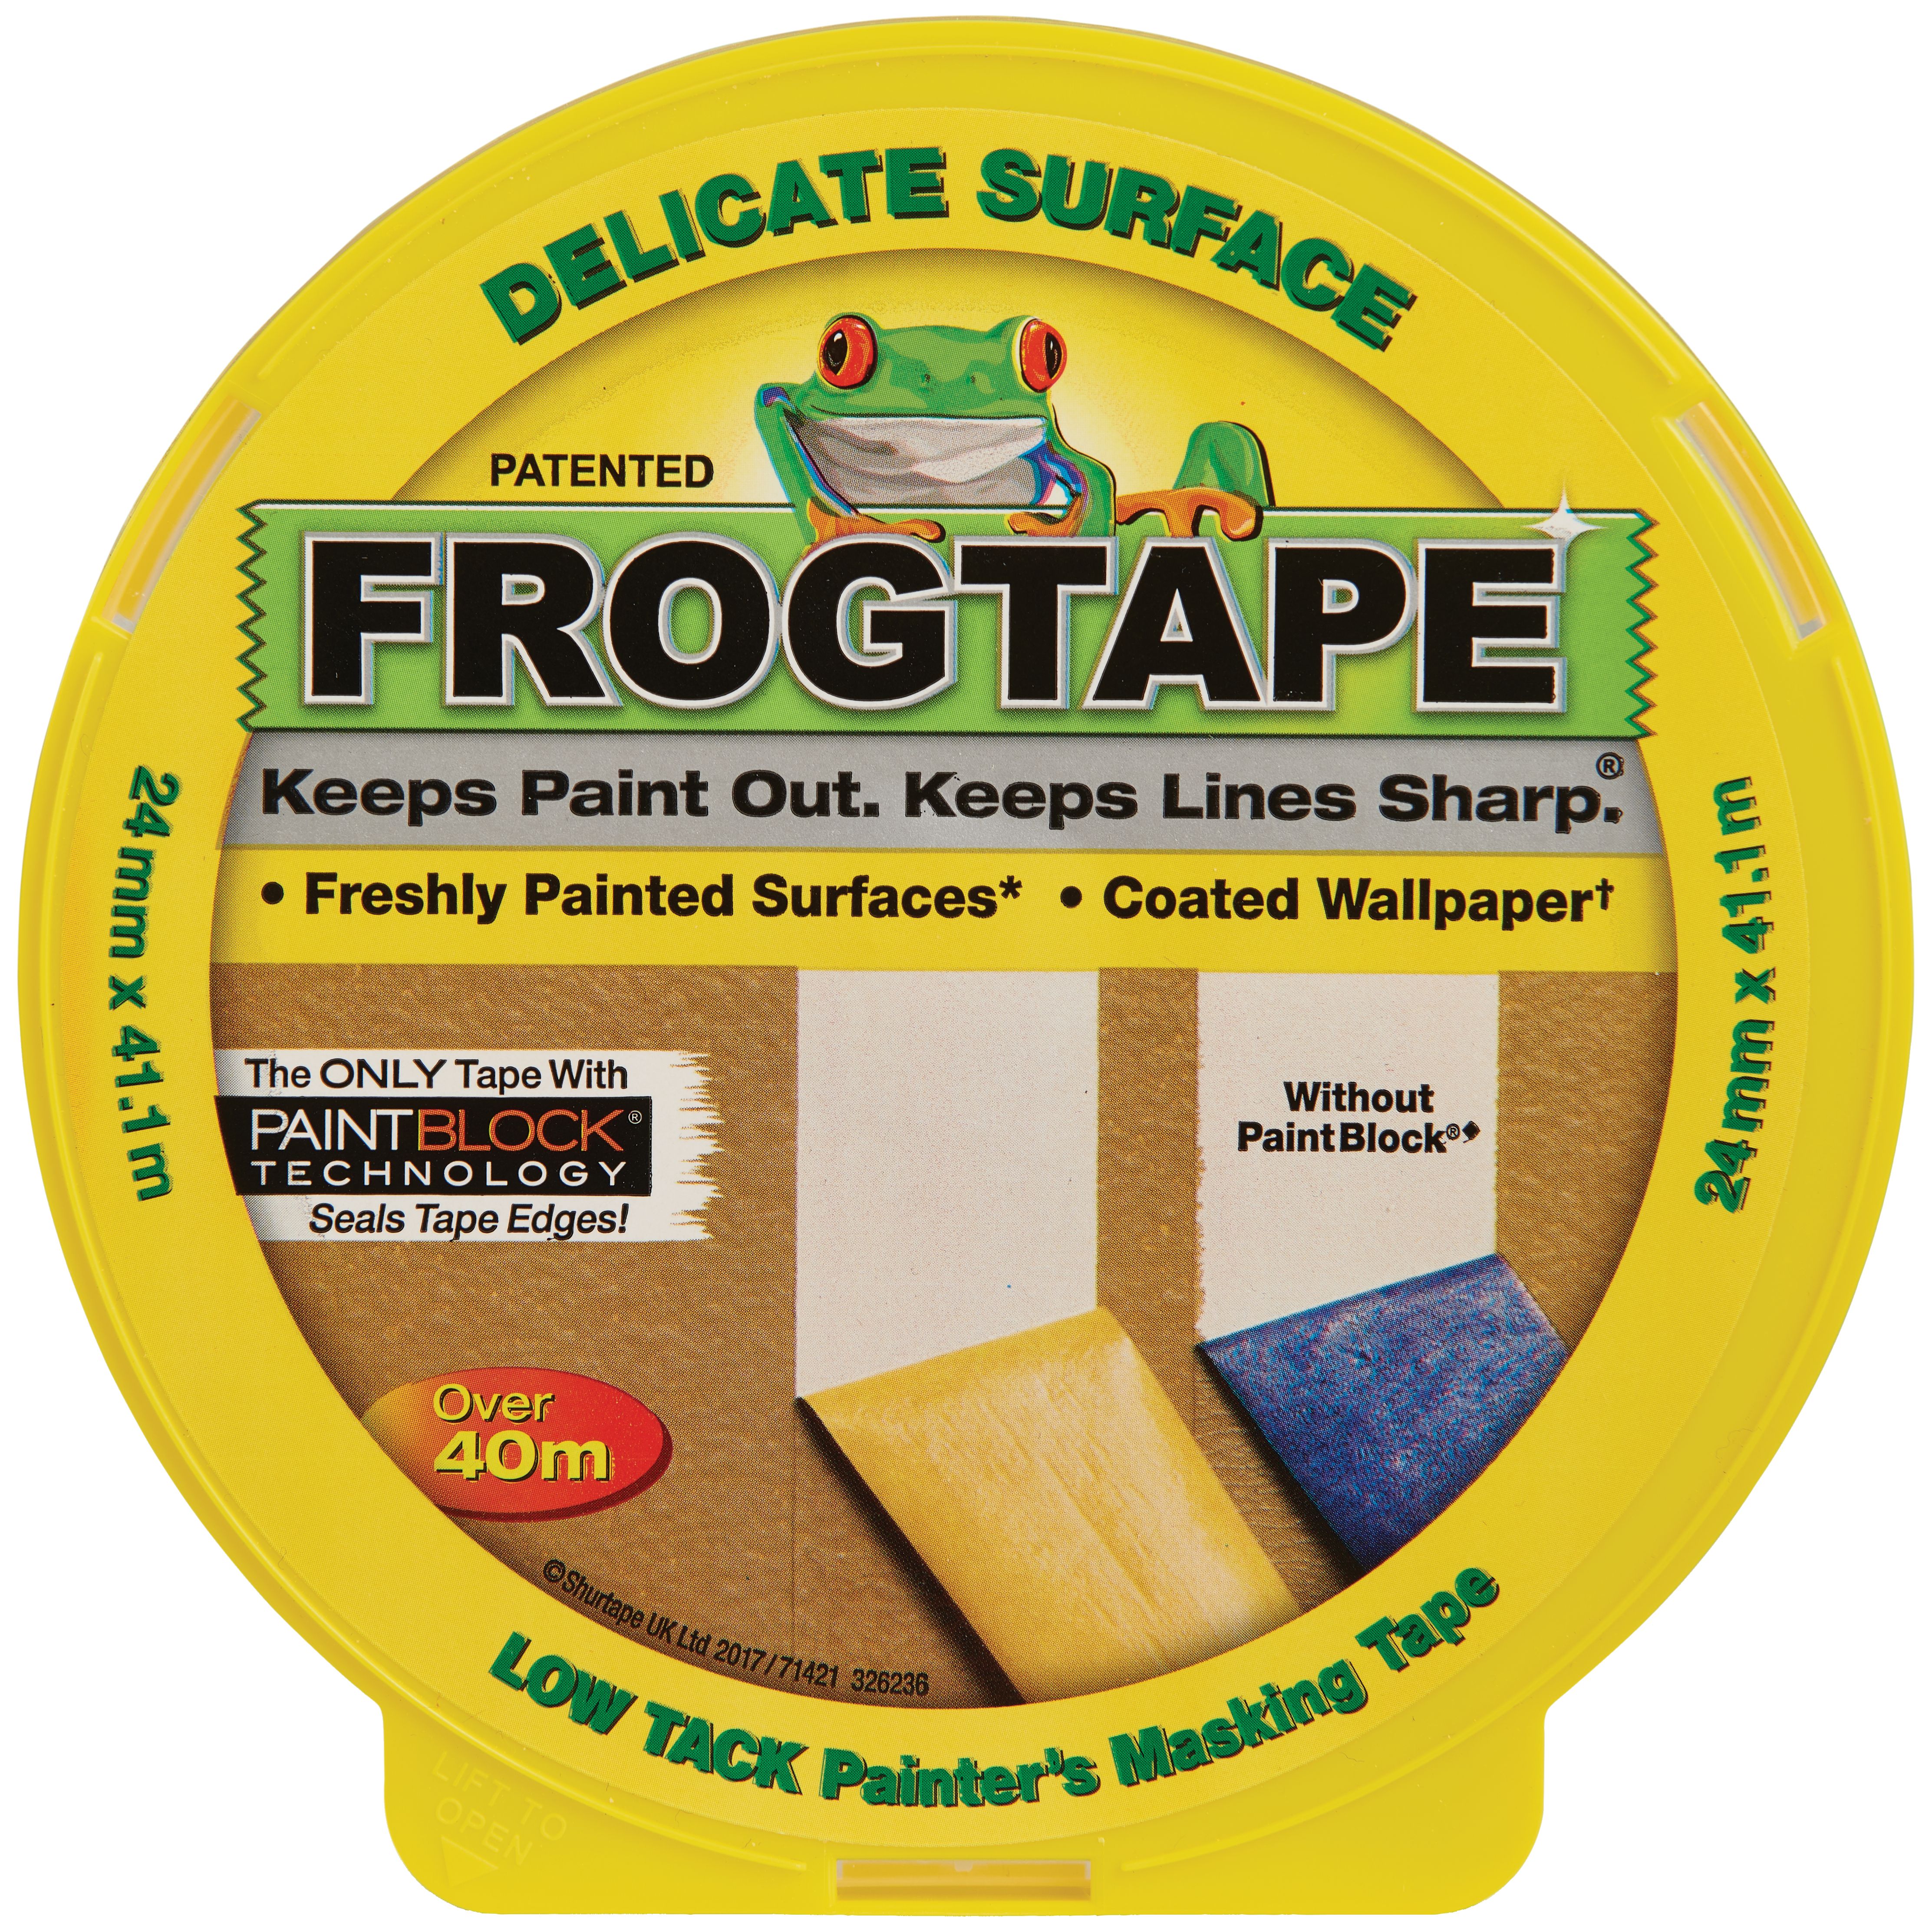 Image of FrogTape Delicate Surface Yellow Masking Tape - 24mm x 41m